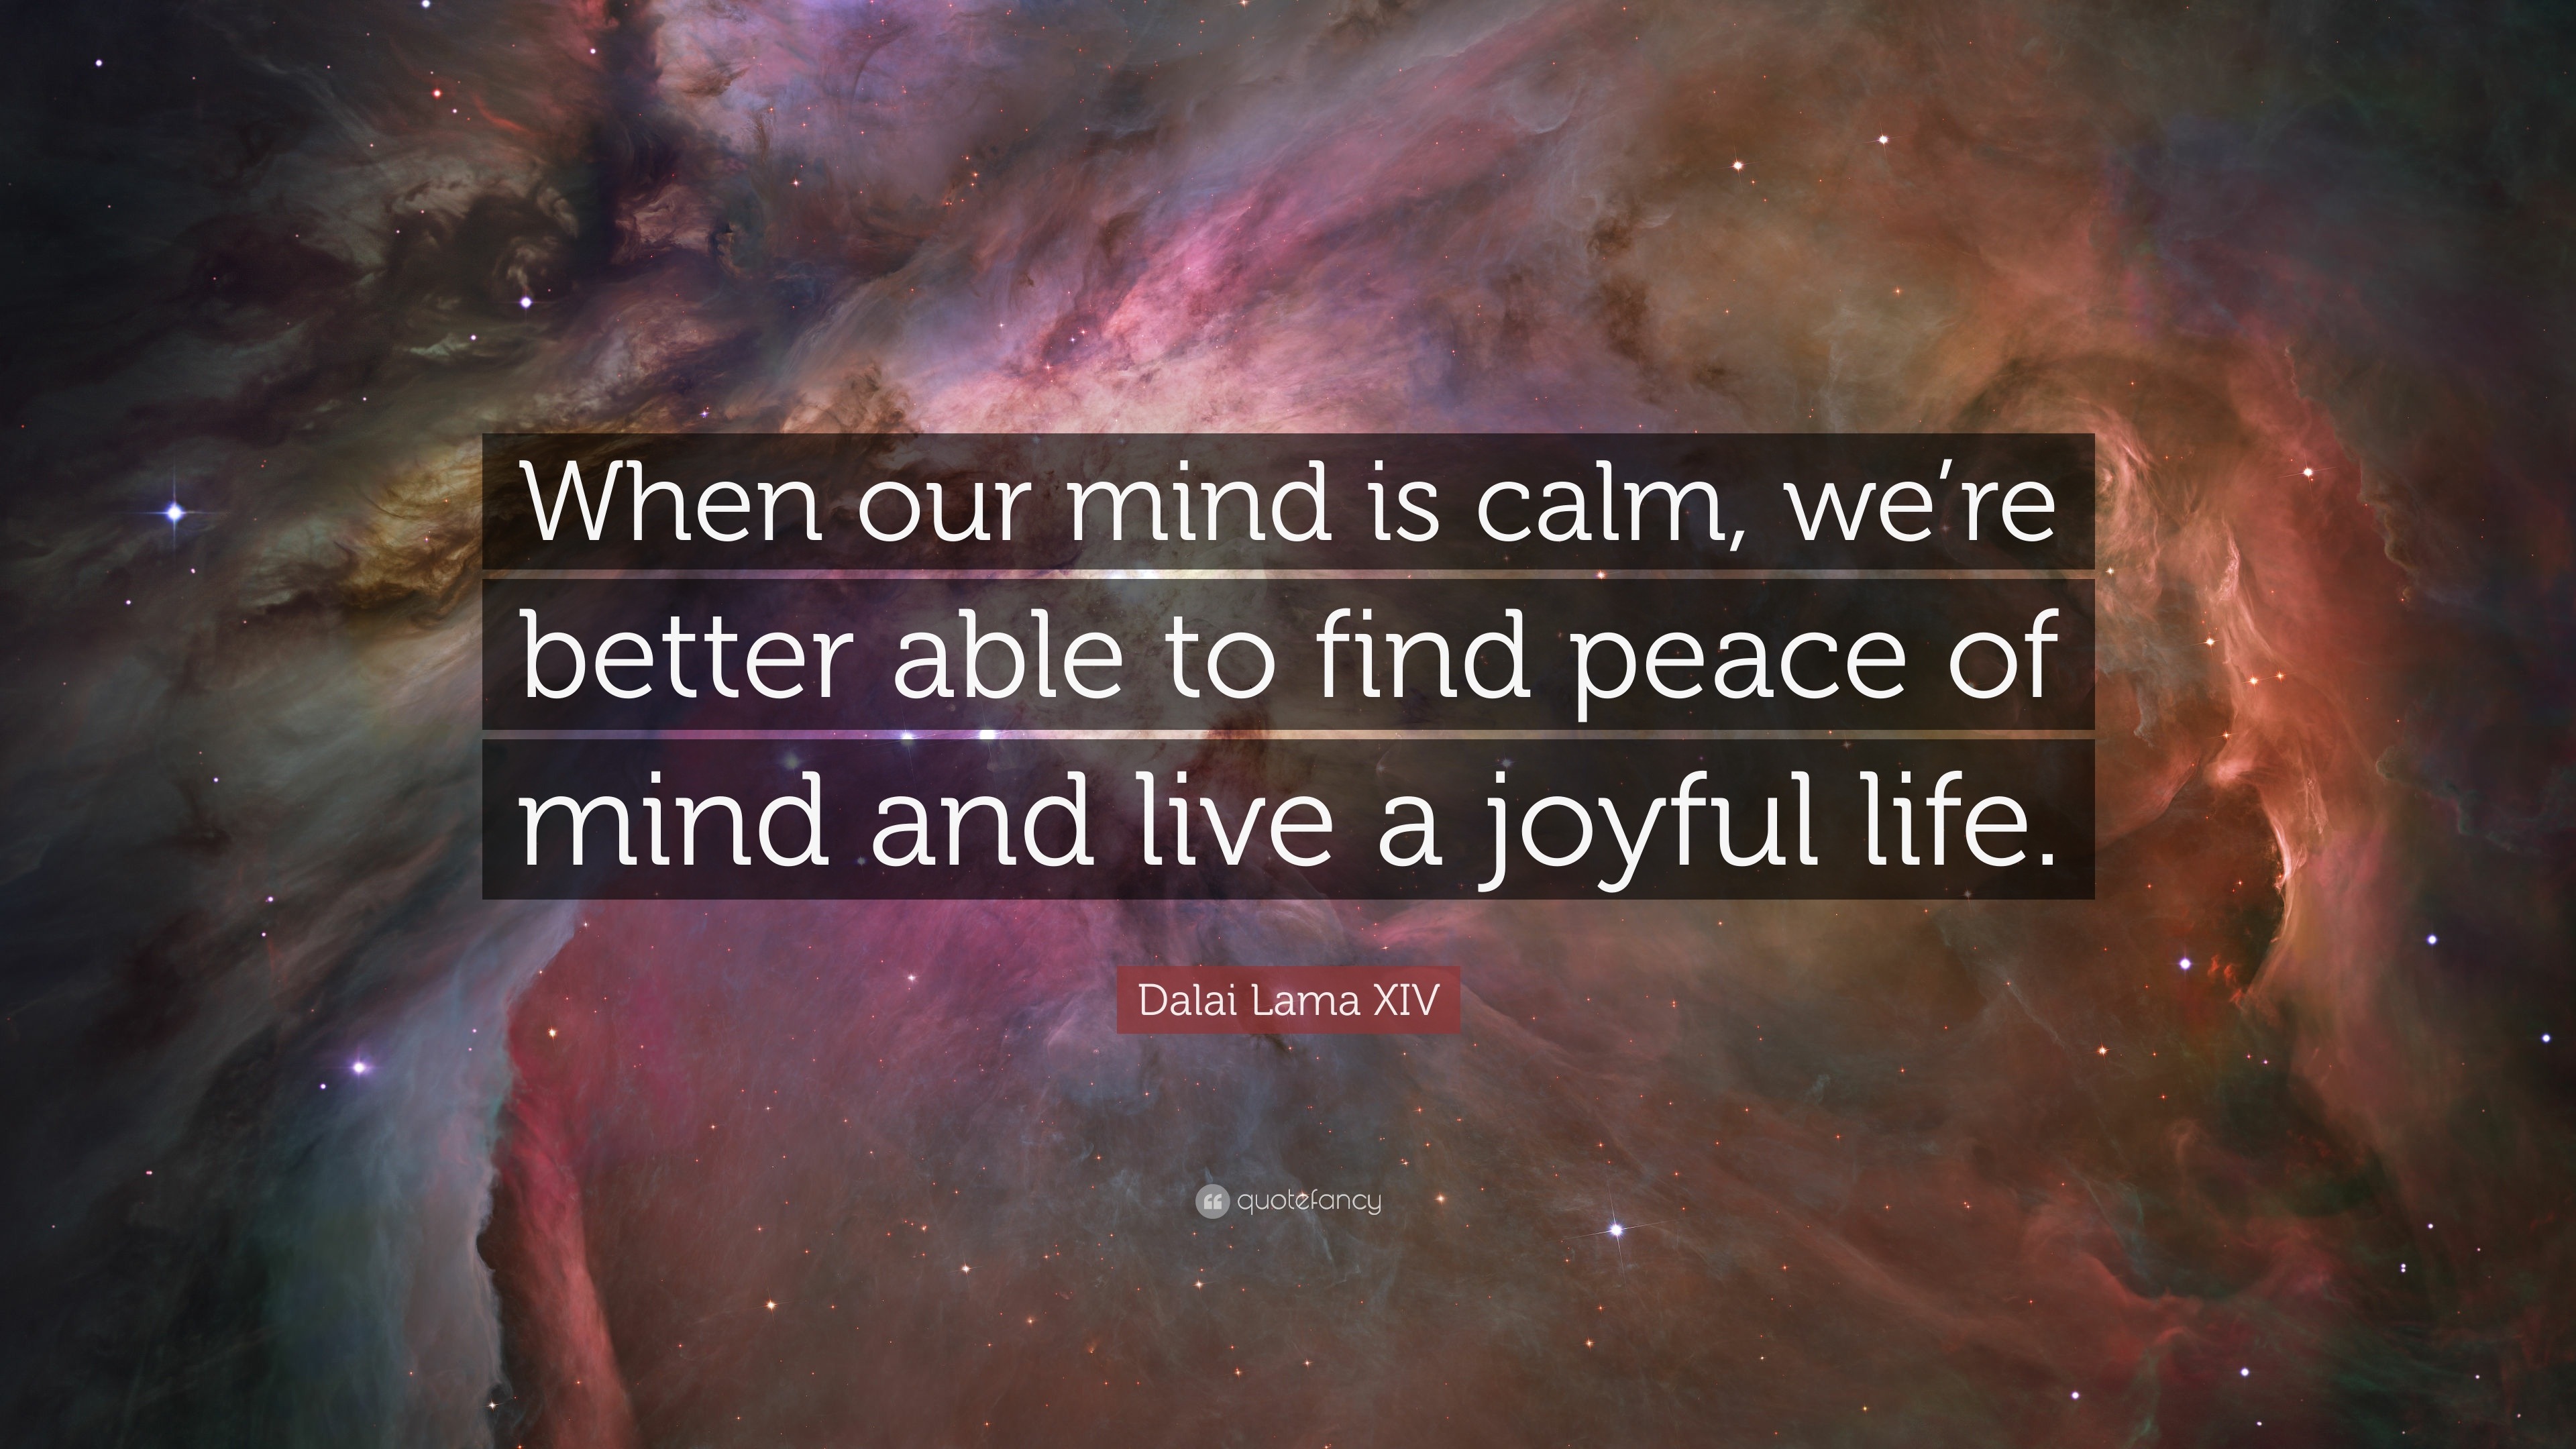 Dalai Lama XIV Quote “When our mind is calm, we’re better